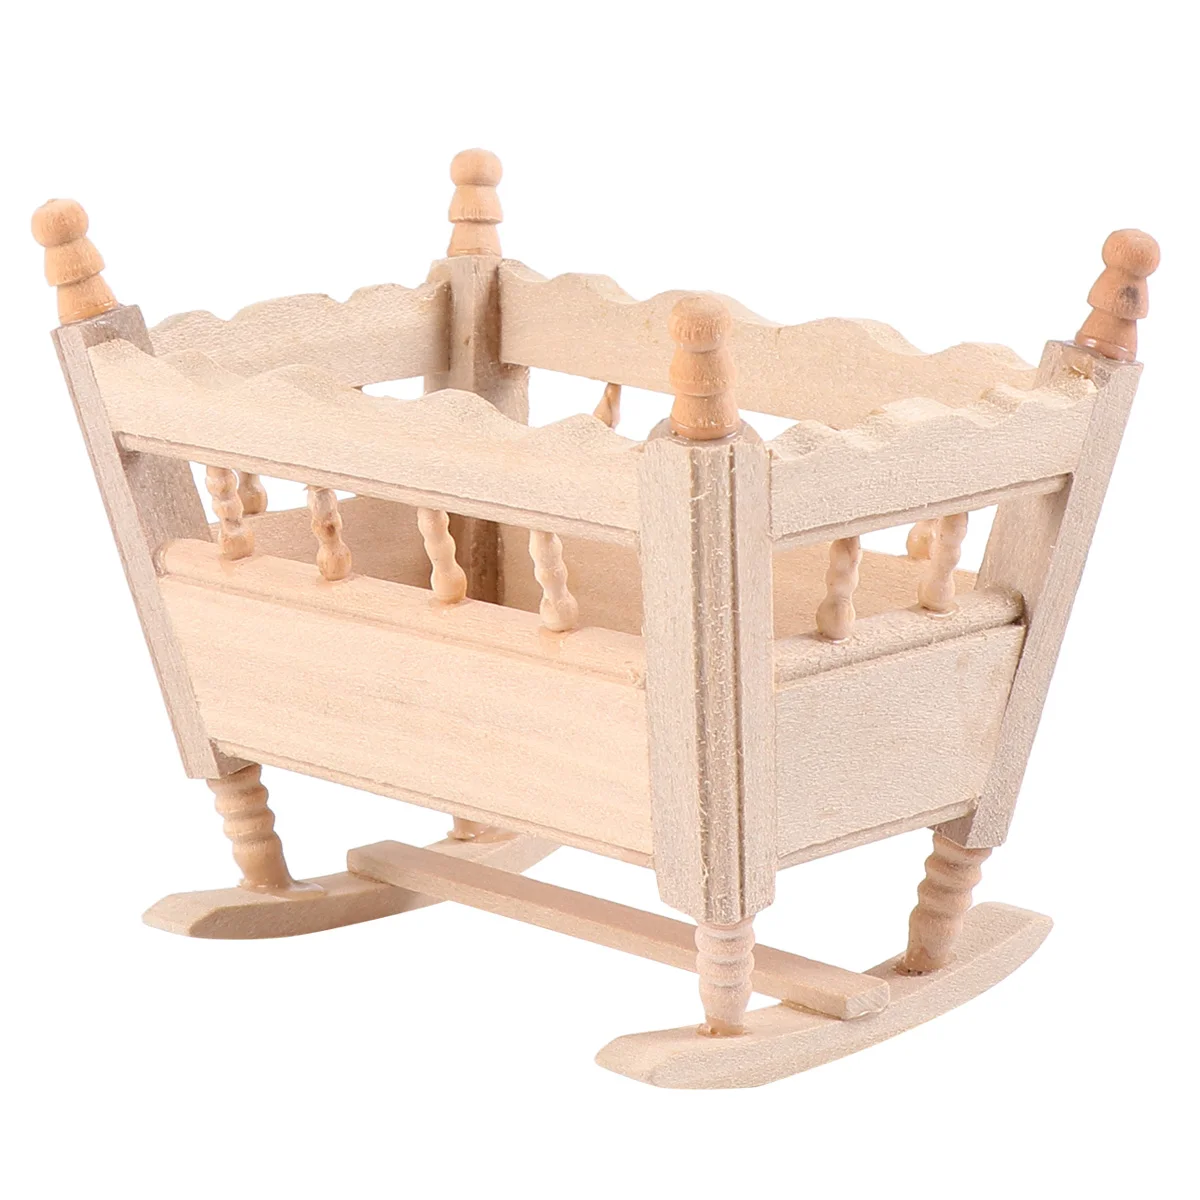 

Doll Wooden Baby Cradle Cribs Crib Cradles And Dollhouse Beds